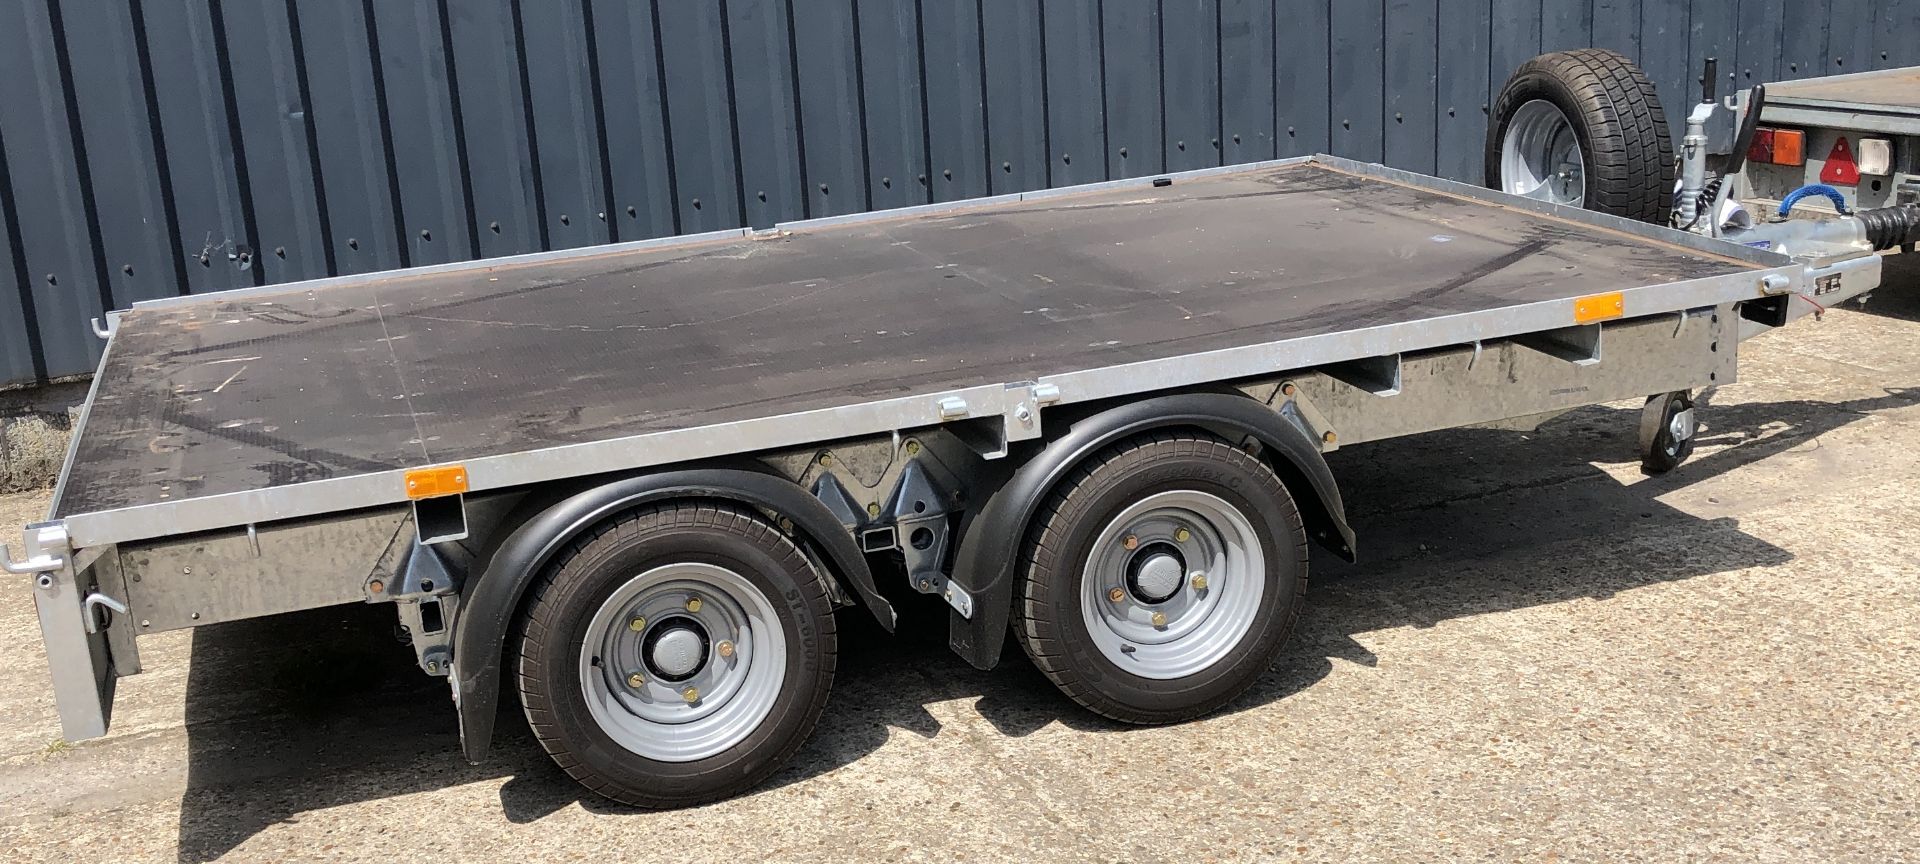 Ifor Williams Type DBS350 2CB LM106G Twin Axle Flat Trailer, Serial Number 0519143, GVW 3500Kg: - Image 2 of 9